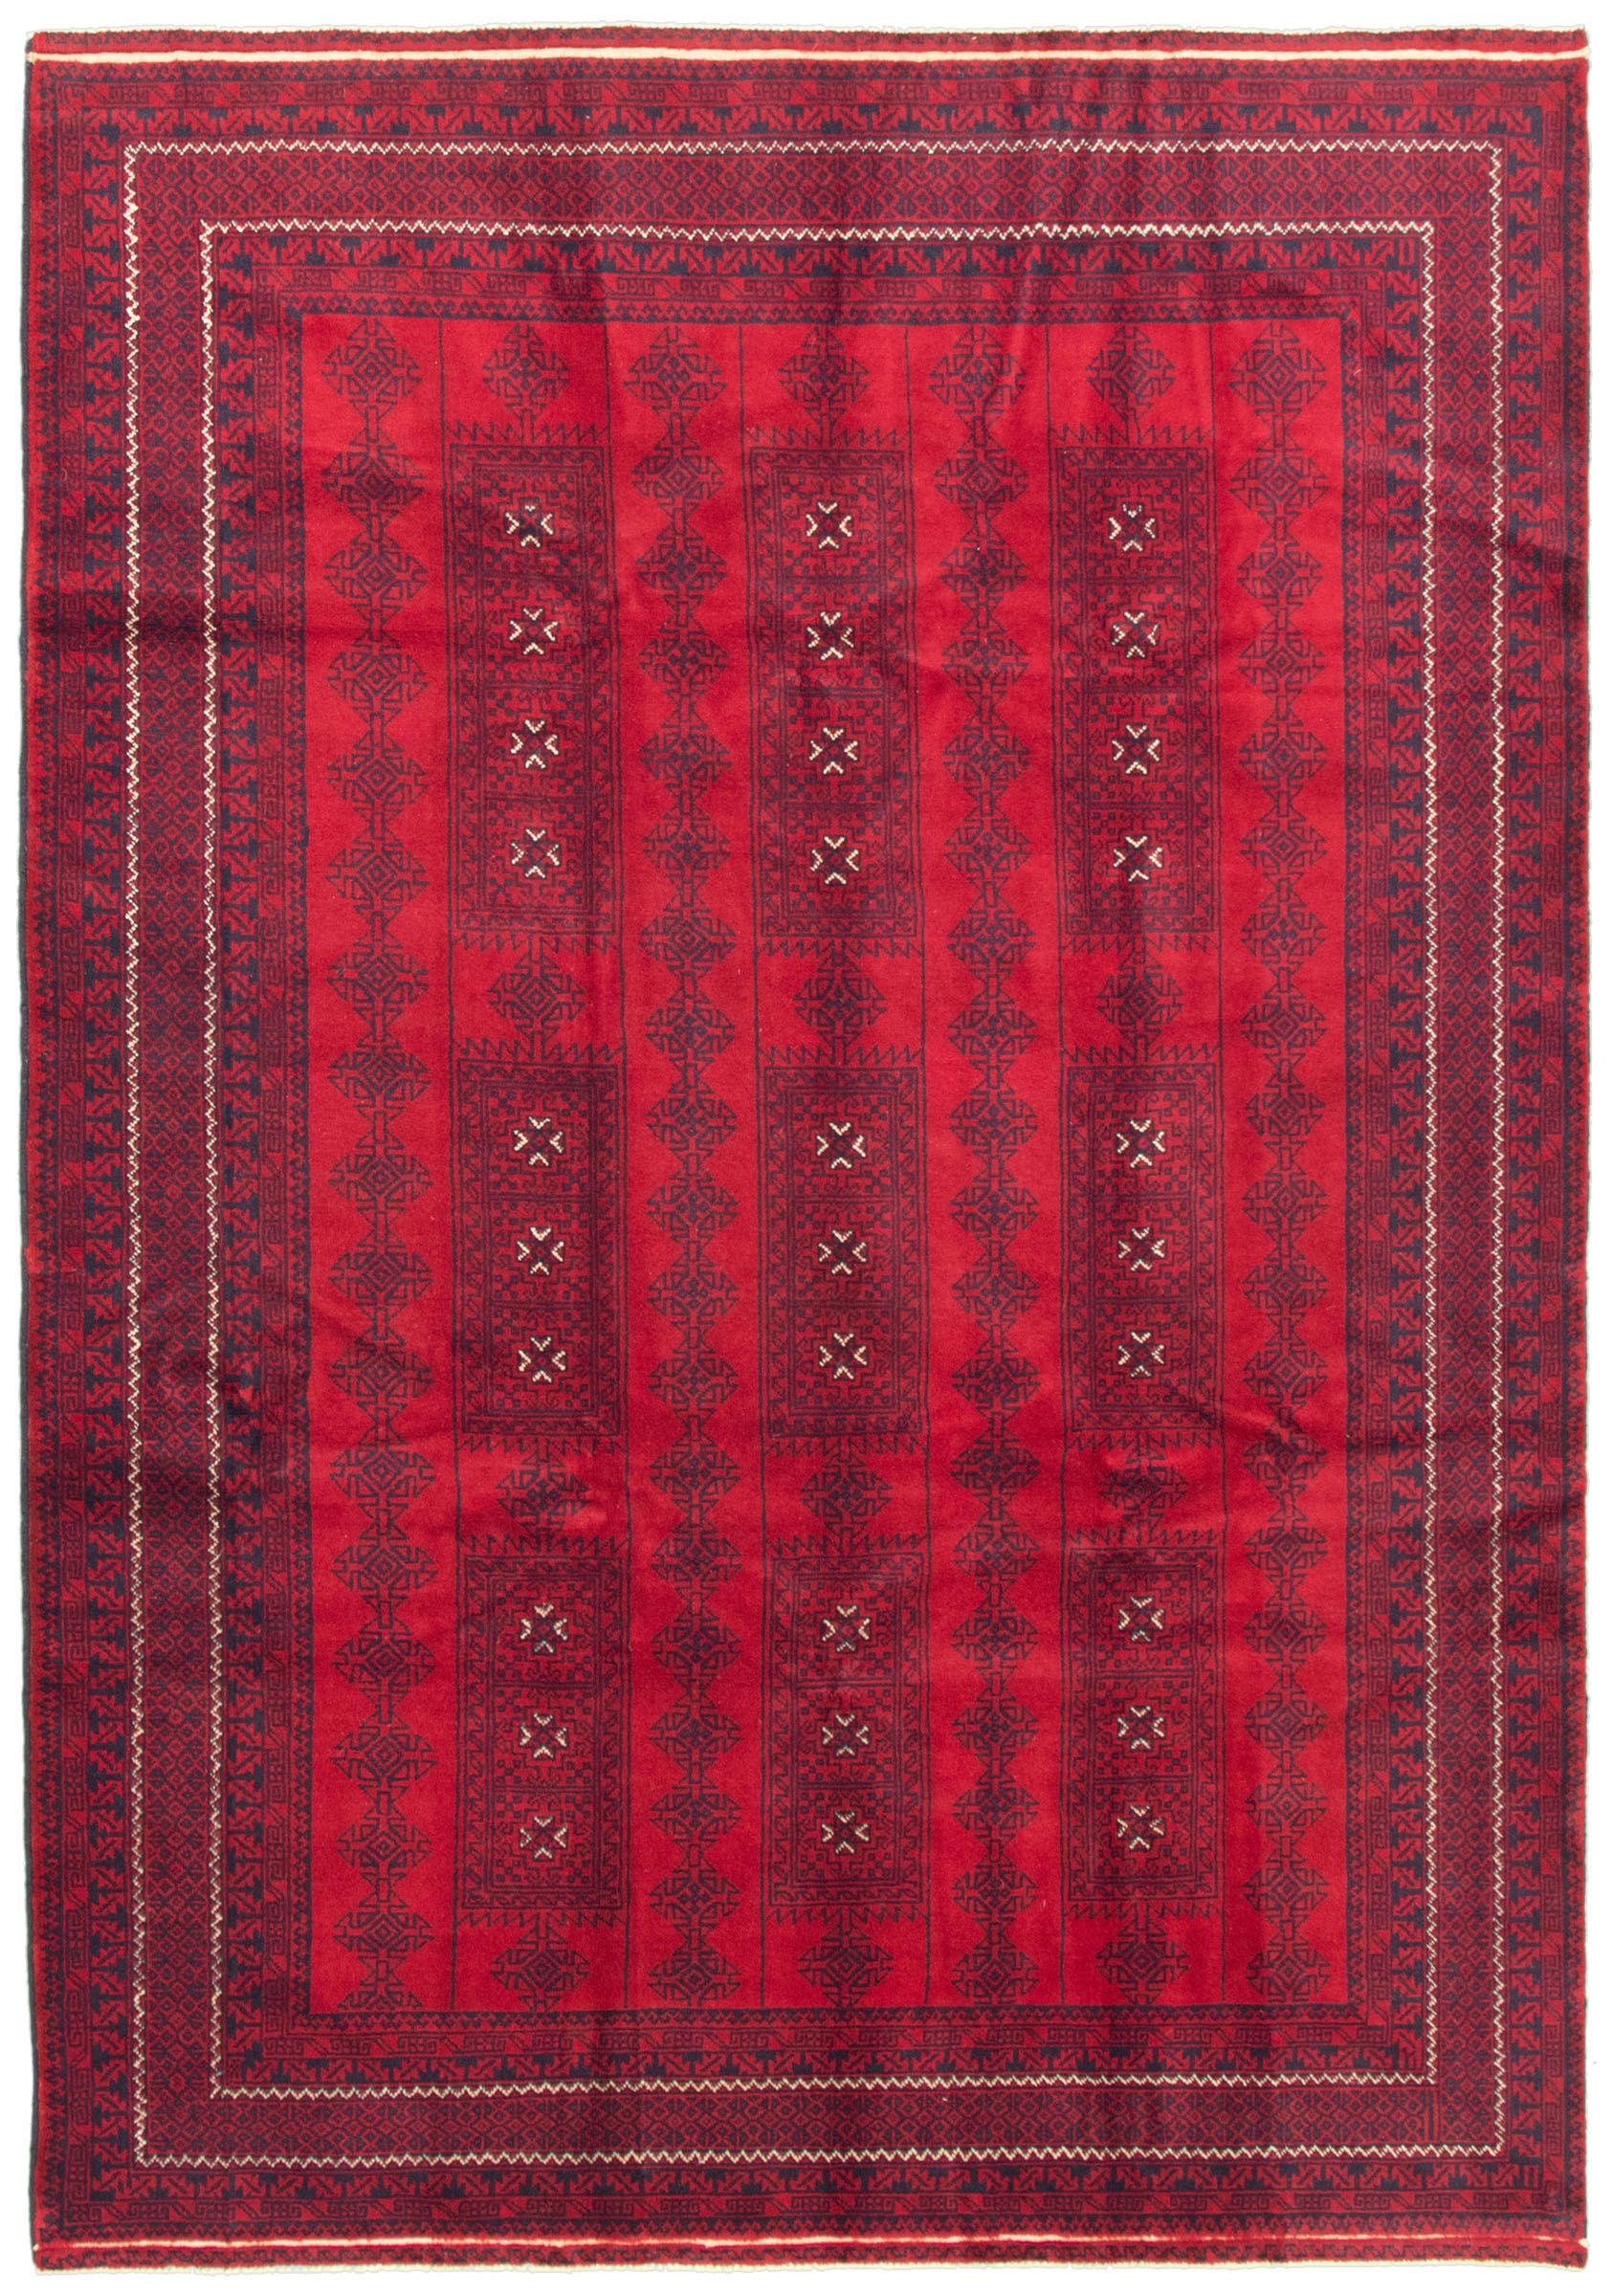 Bedroom Hand-Knotted Wool Rug 311600 Tajik Caucasian Bordered Red Rug 6'5 x 9'2 eCarpet Gallery Large Area Rug for Living Room